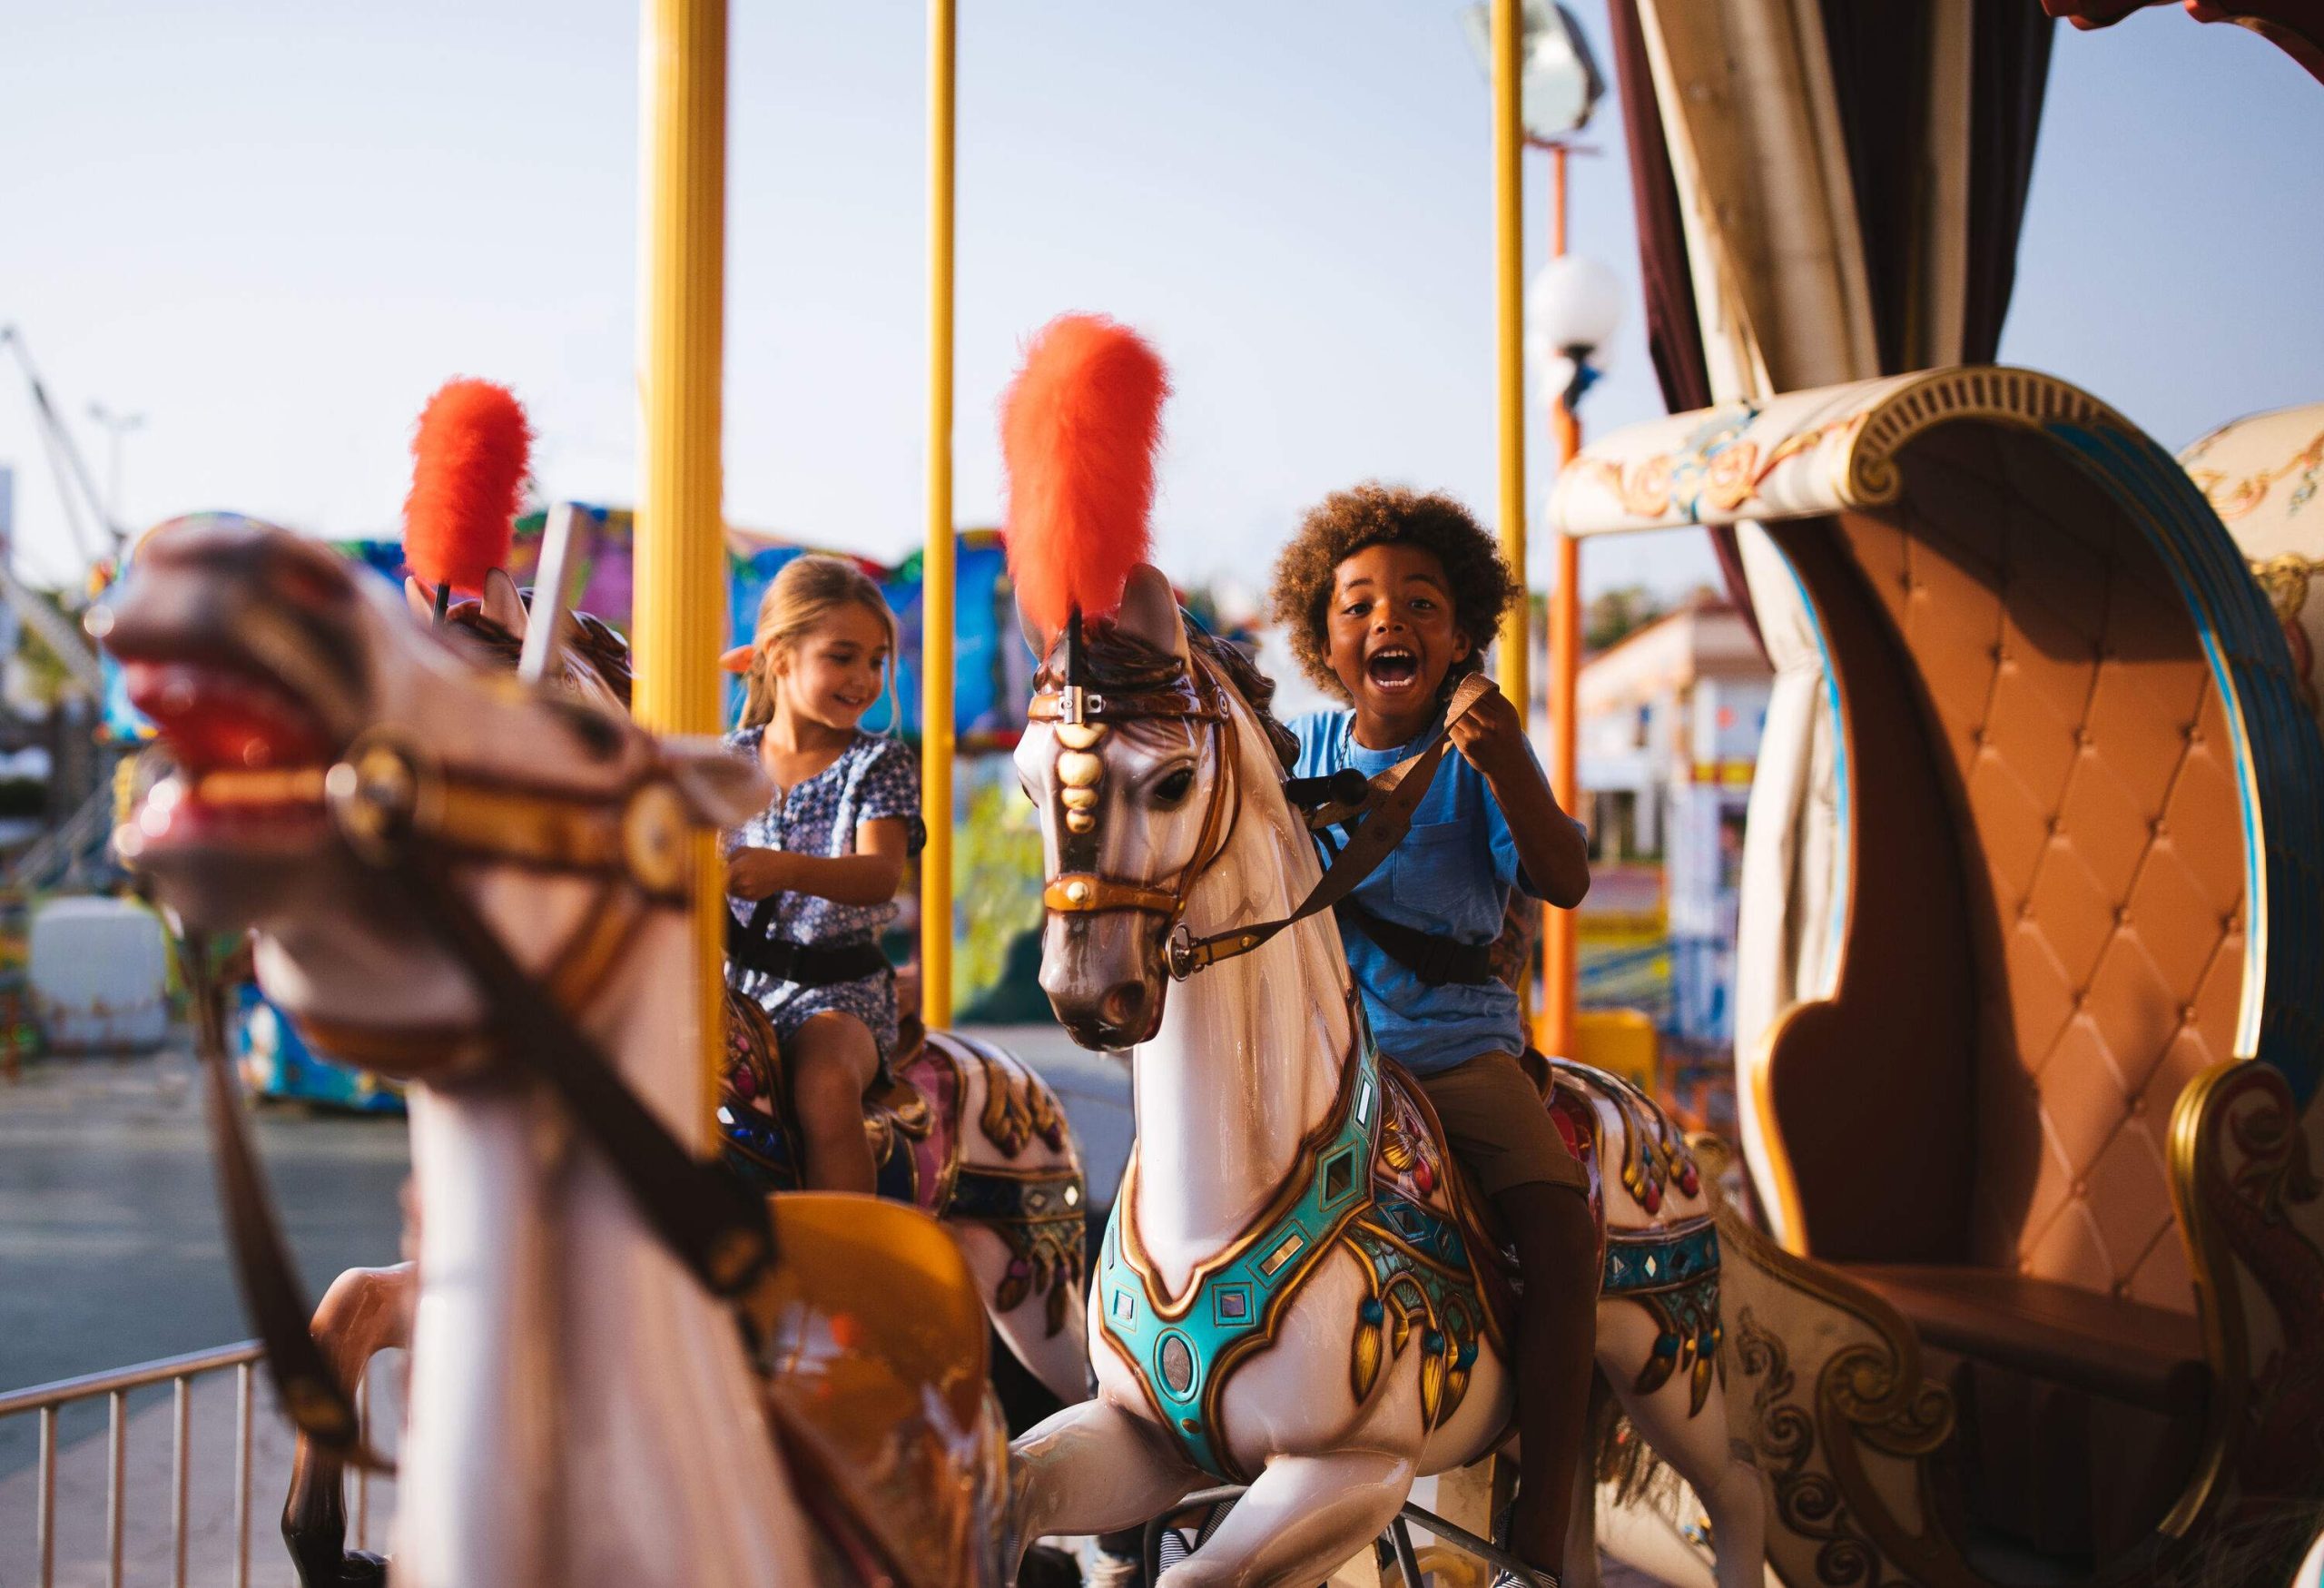 Two kids enjoy riding colourful horse mounts in a carousel.